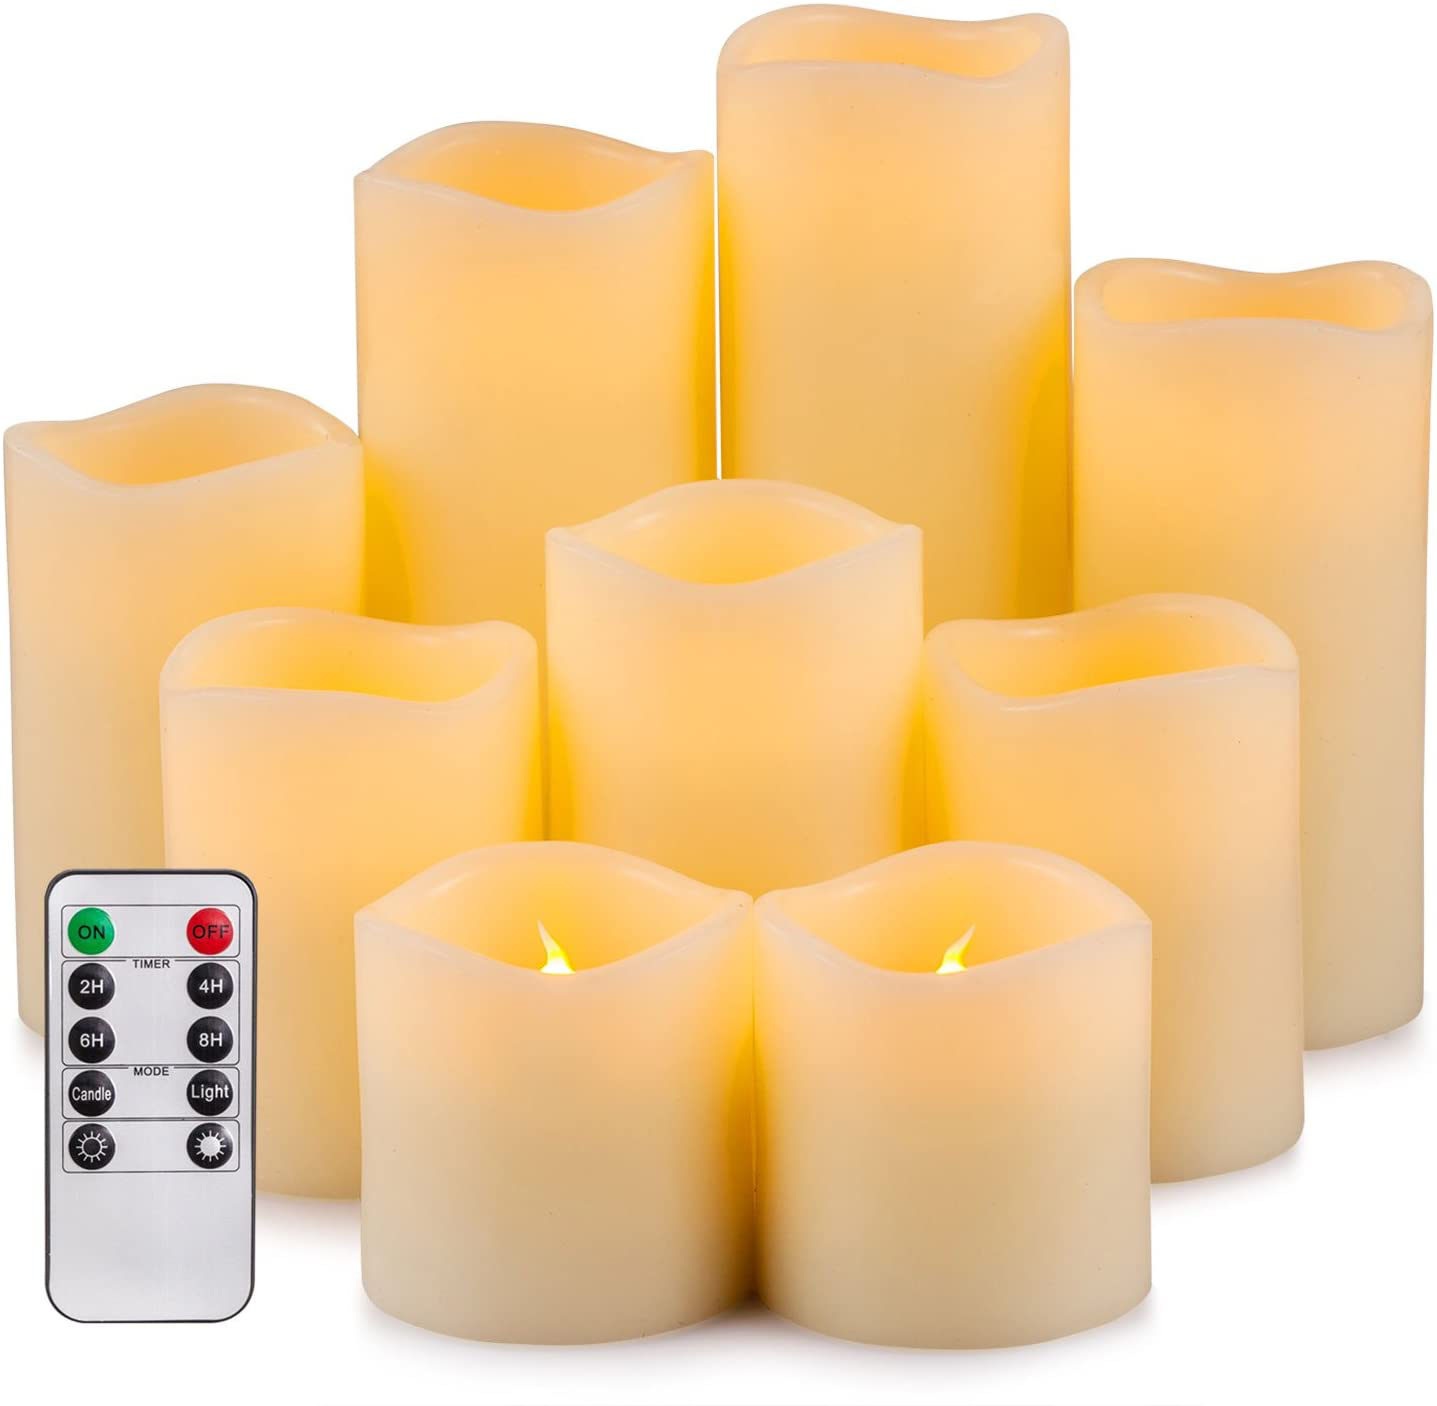 RY King Battery Operated Flameless Candle Set of 9 Real Wax Pillar Decorative Led Fake Candles with Remote Control and Timer